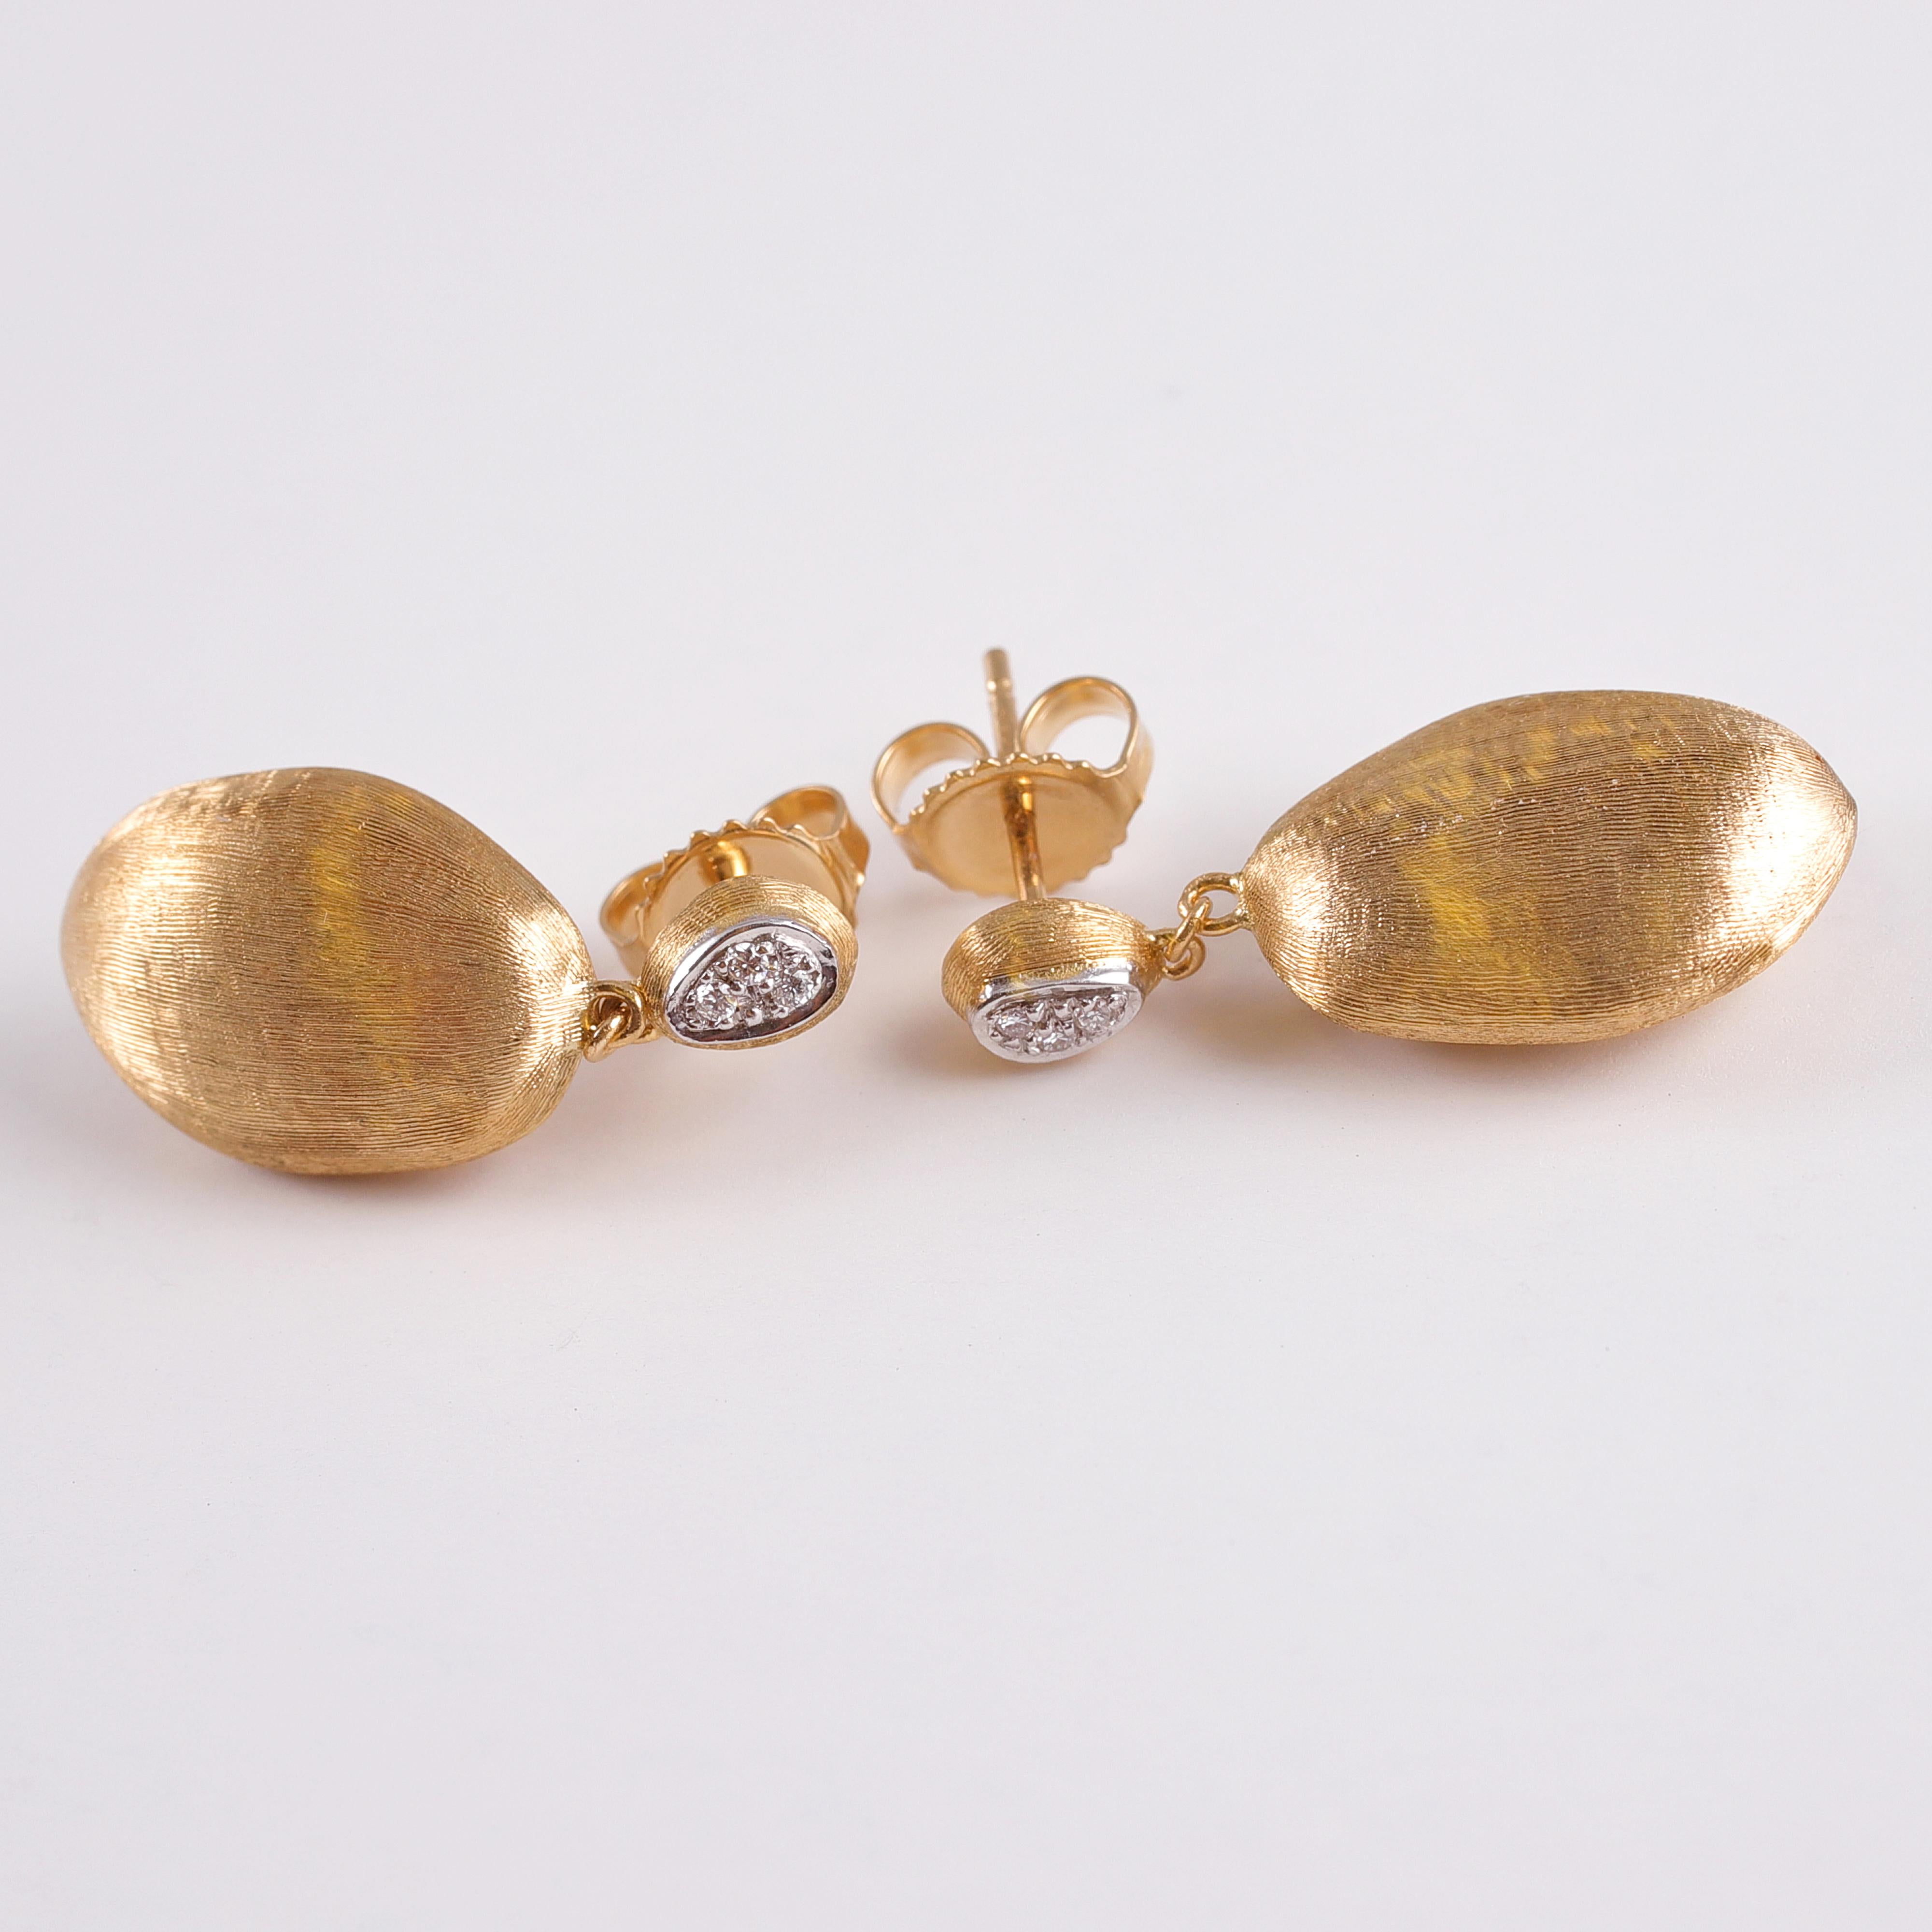 Everyday casual - or a special evening, these earrings will complete your look!  In textured 18 karat yellow gold, they are secured with standard friction backs and support twelve bead-set, accent diamonds.